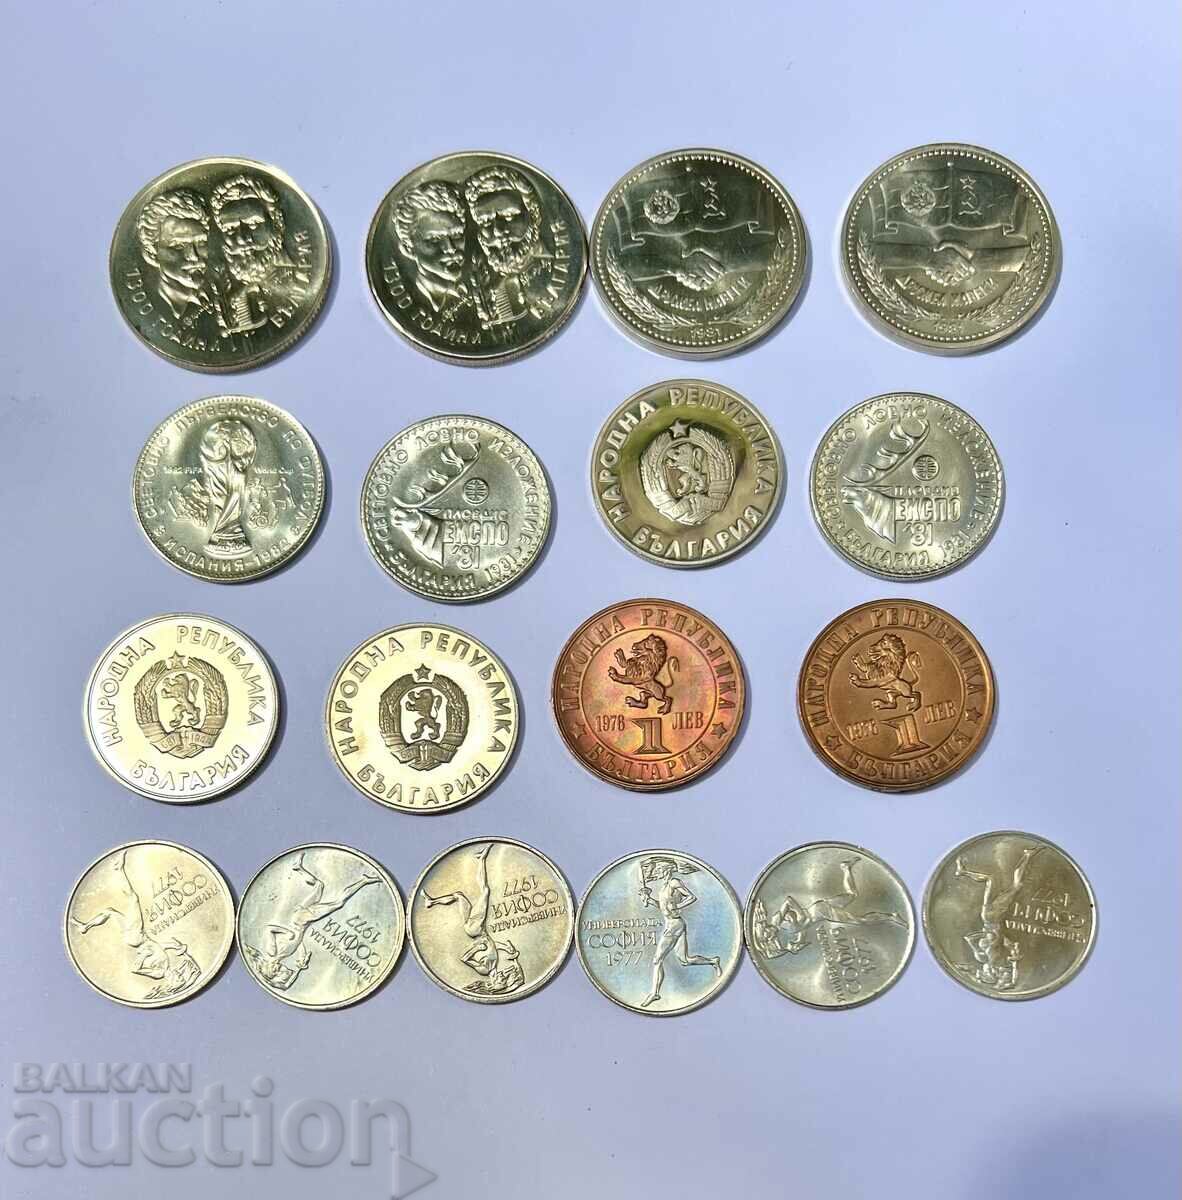 Lot 18 pcs. excellent NRB nickel coins 1 and 5 BGN 50 cents.